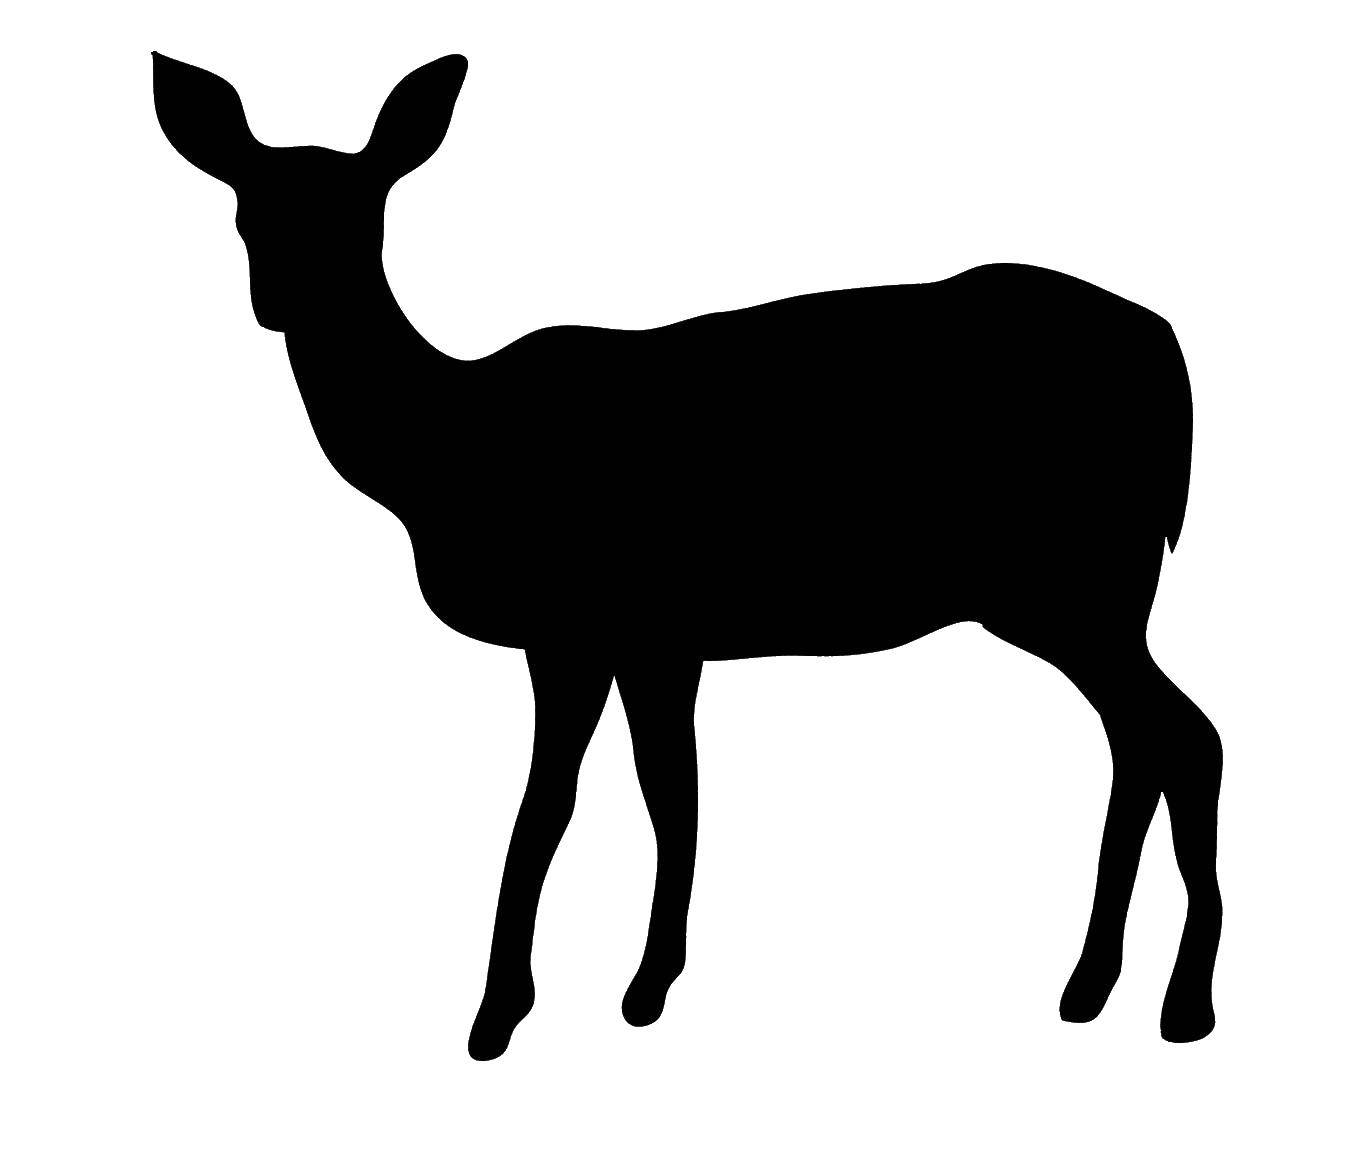 Coloring The contour of the calf. Category Animals. Tags:  animals, outline, reindeer.